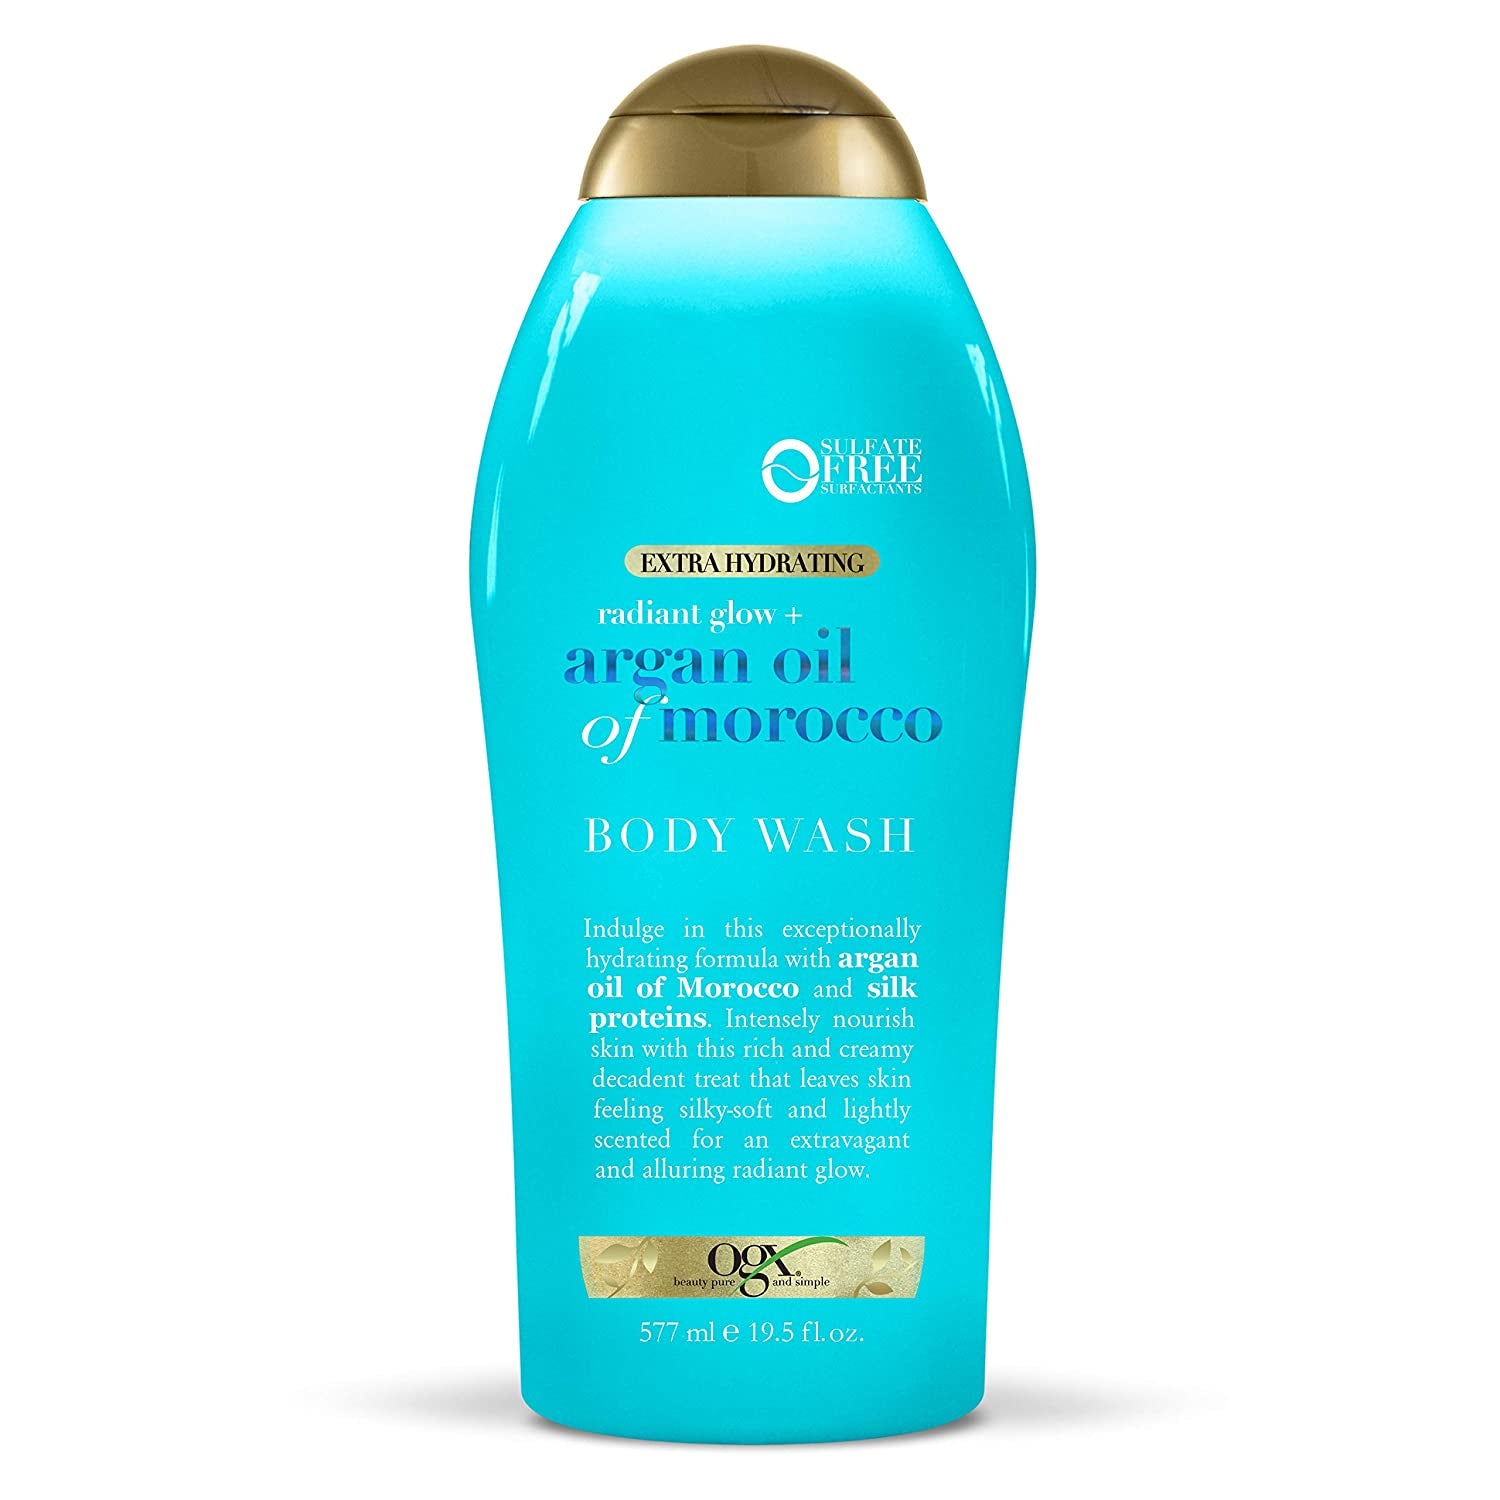 OGX Radiant Glow + Argan Oil of Morocco Extra Hydrating Body Wash for Dry Skin, Moisturizing Gel Body Cleanser for Silky Soft Skin, Paraben-Free, Sulfate-Free Surfactants, 19.5 Fl Oz